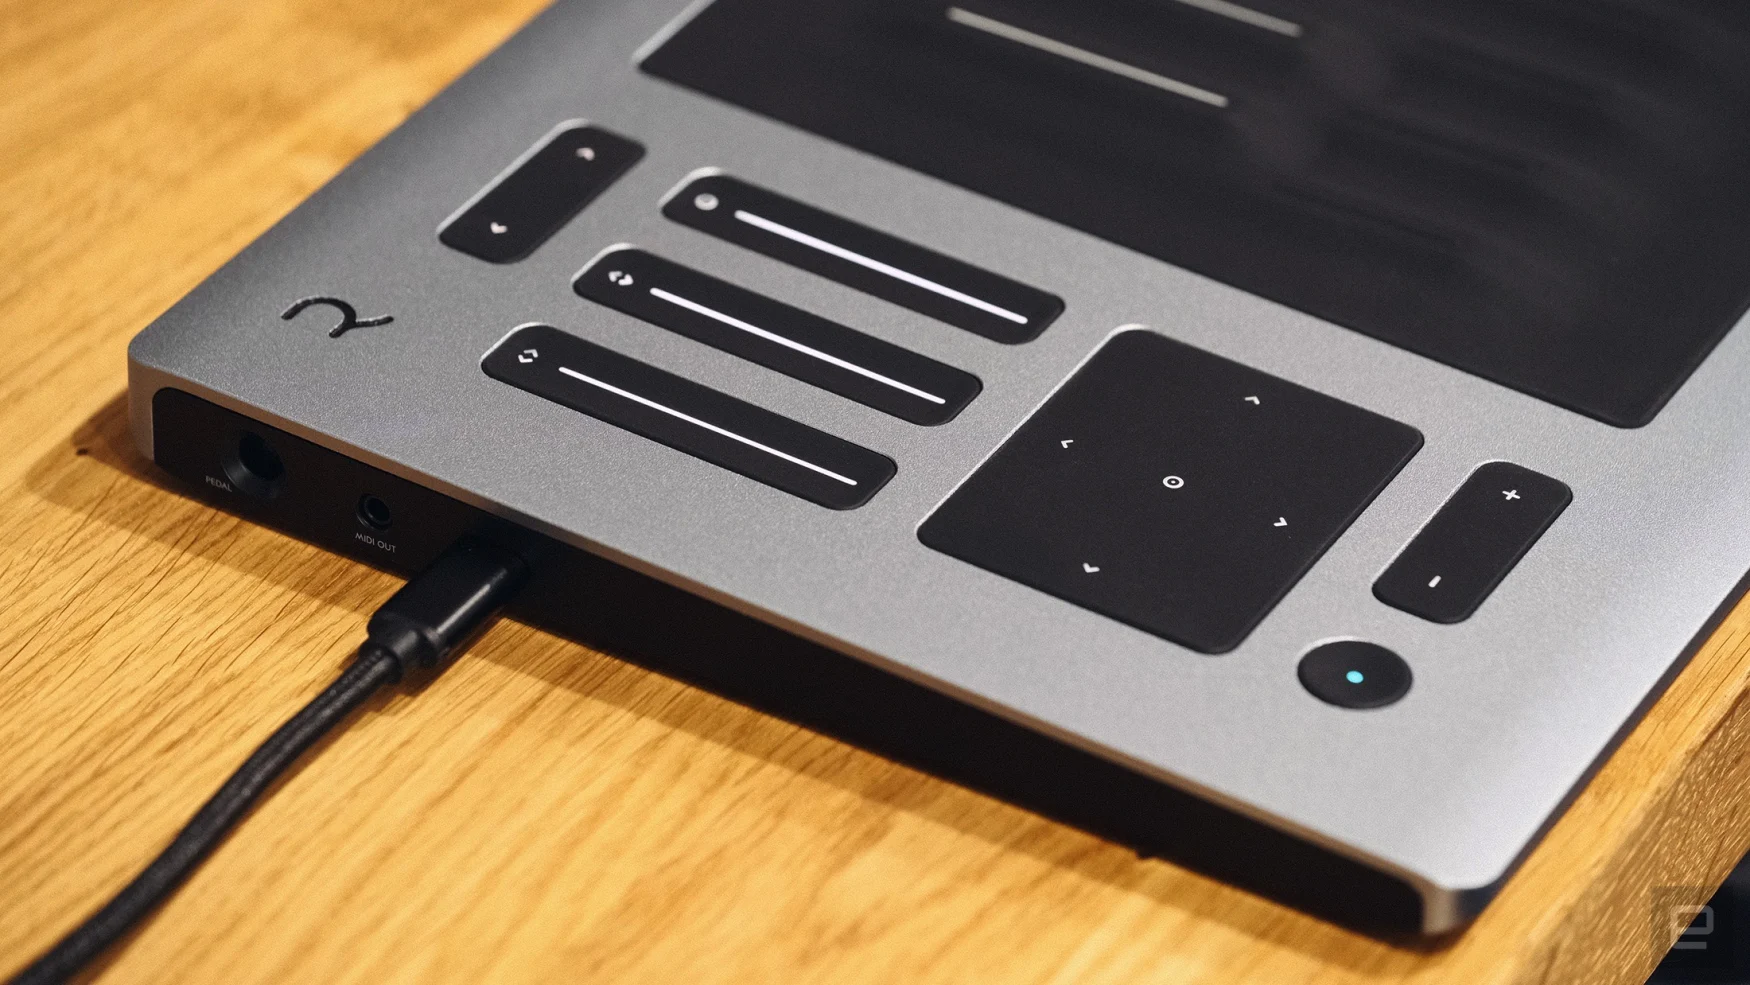 The XY pad and touch sliders on the side of the Roli Seaboard Rise 2.